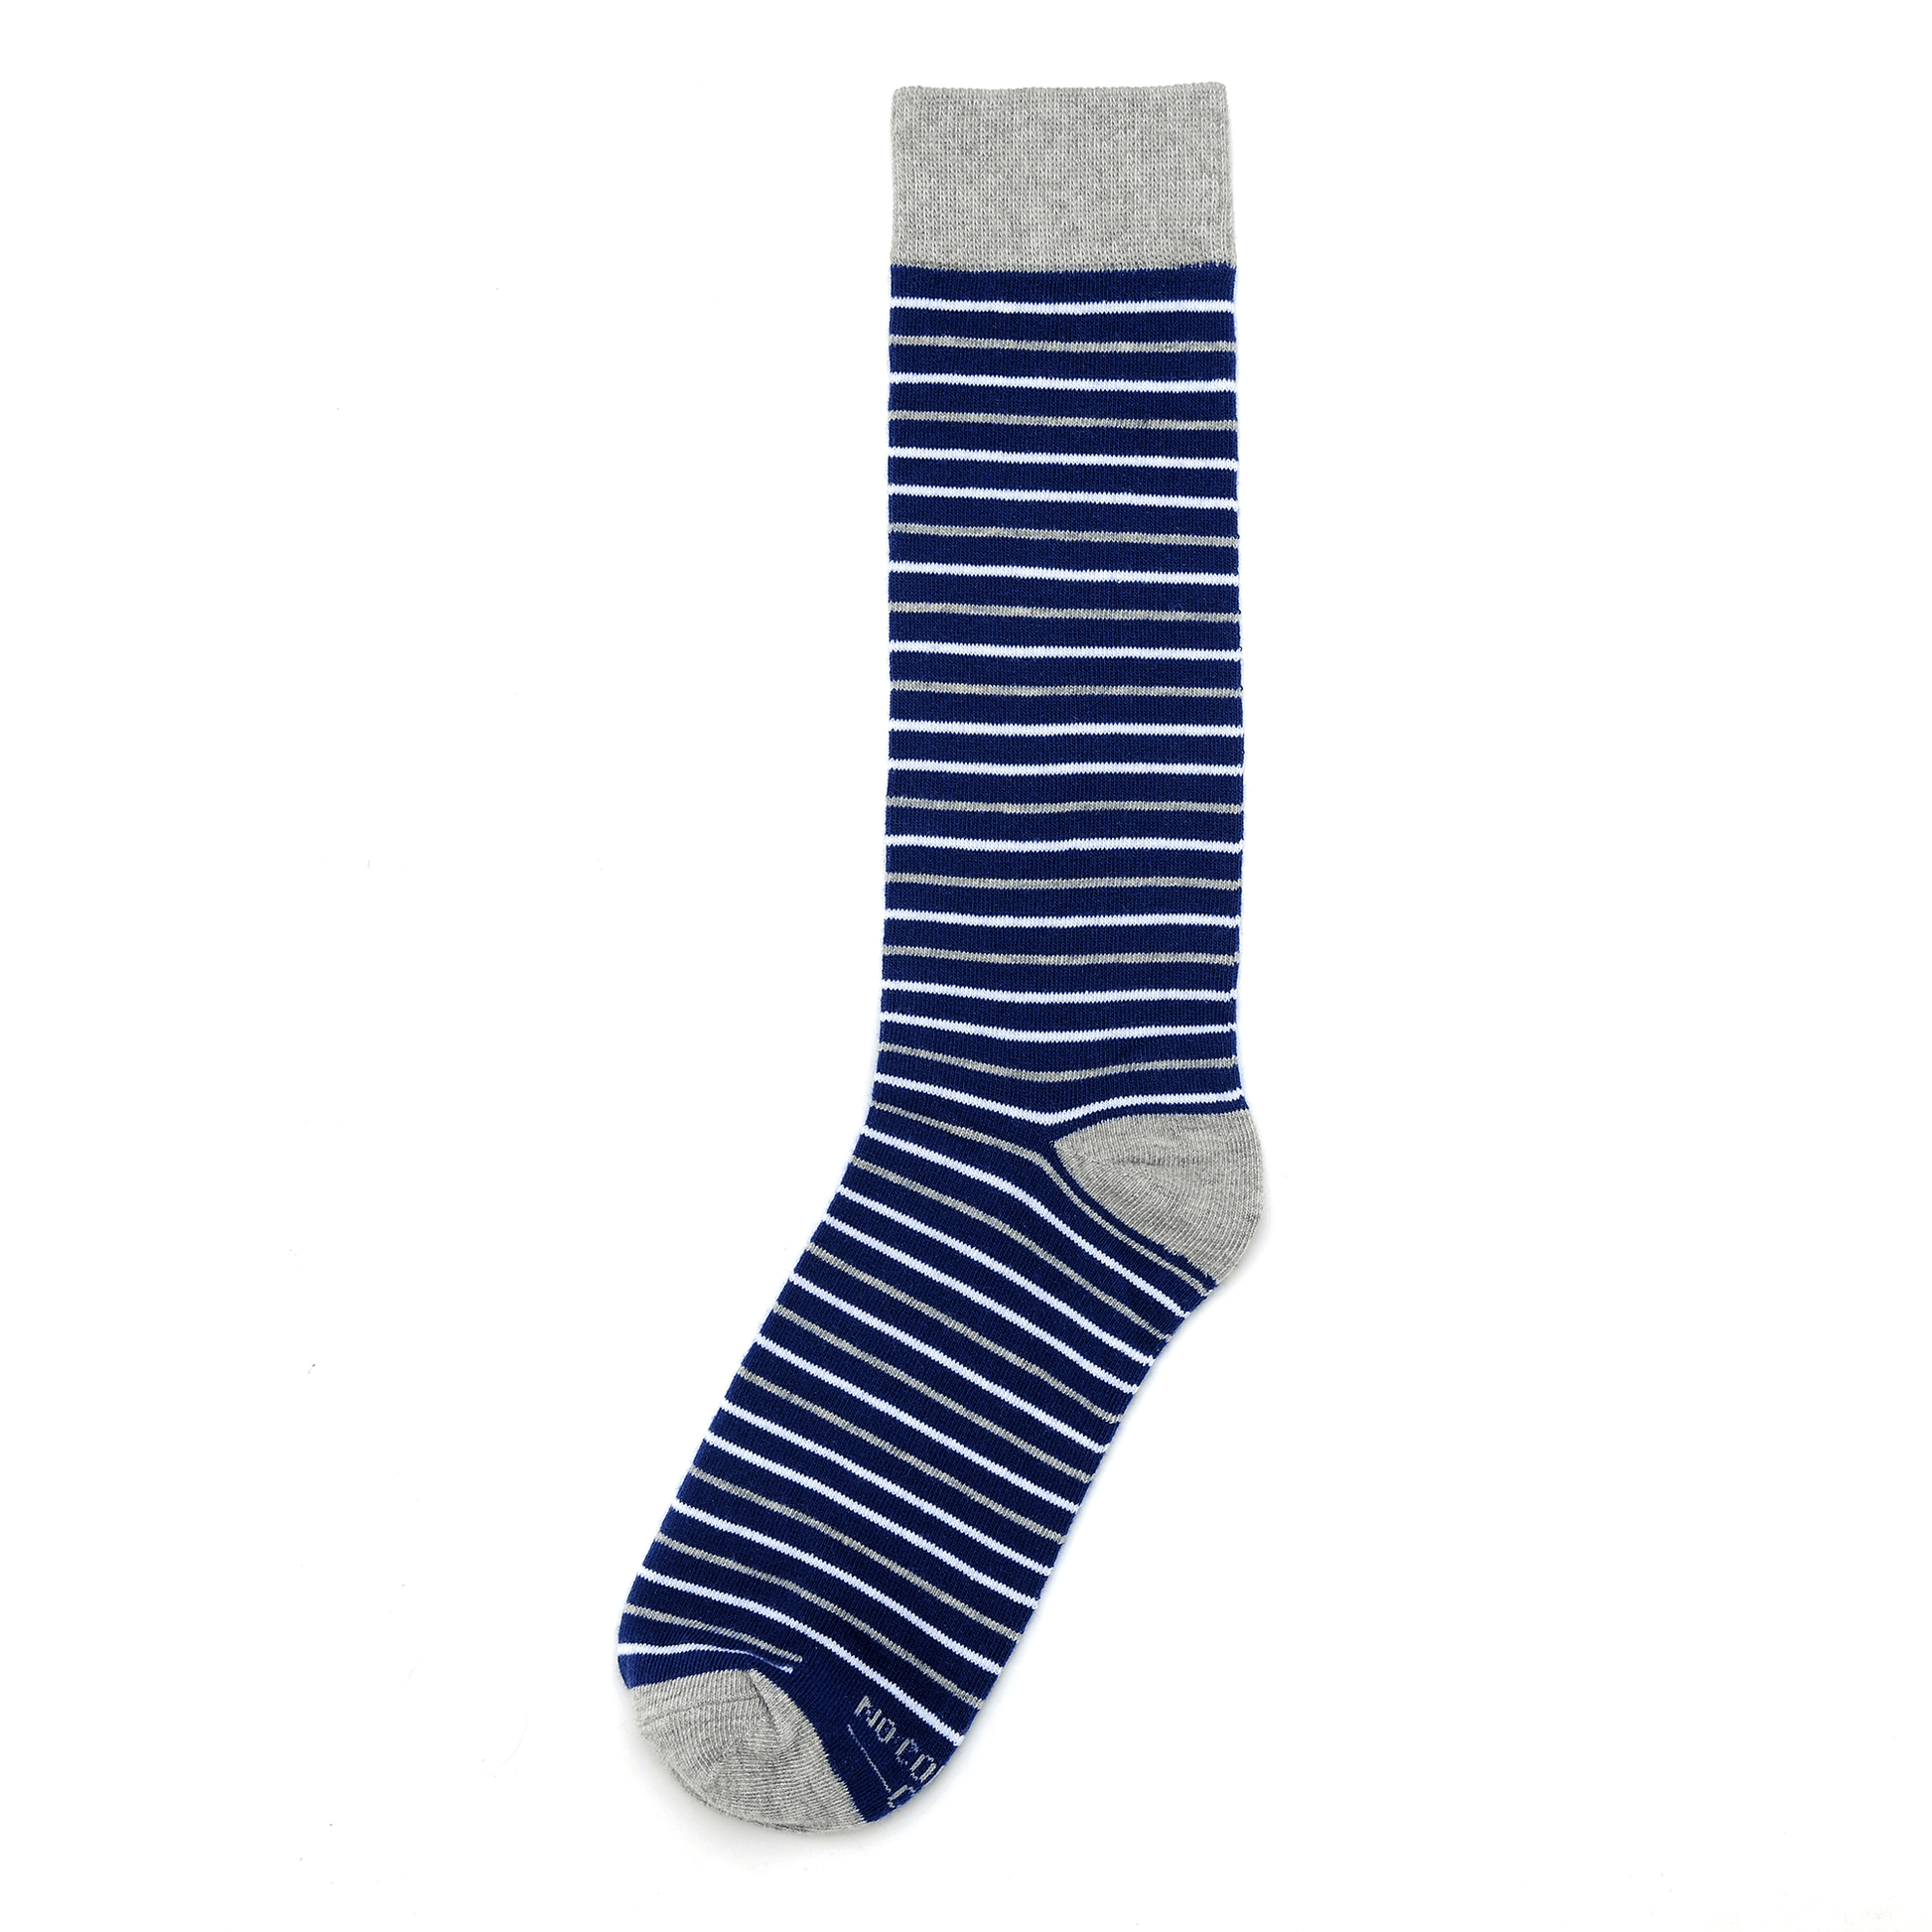 The No Cold Feet - Navy - Men's Gifts - Manly Bands